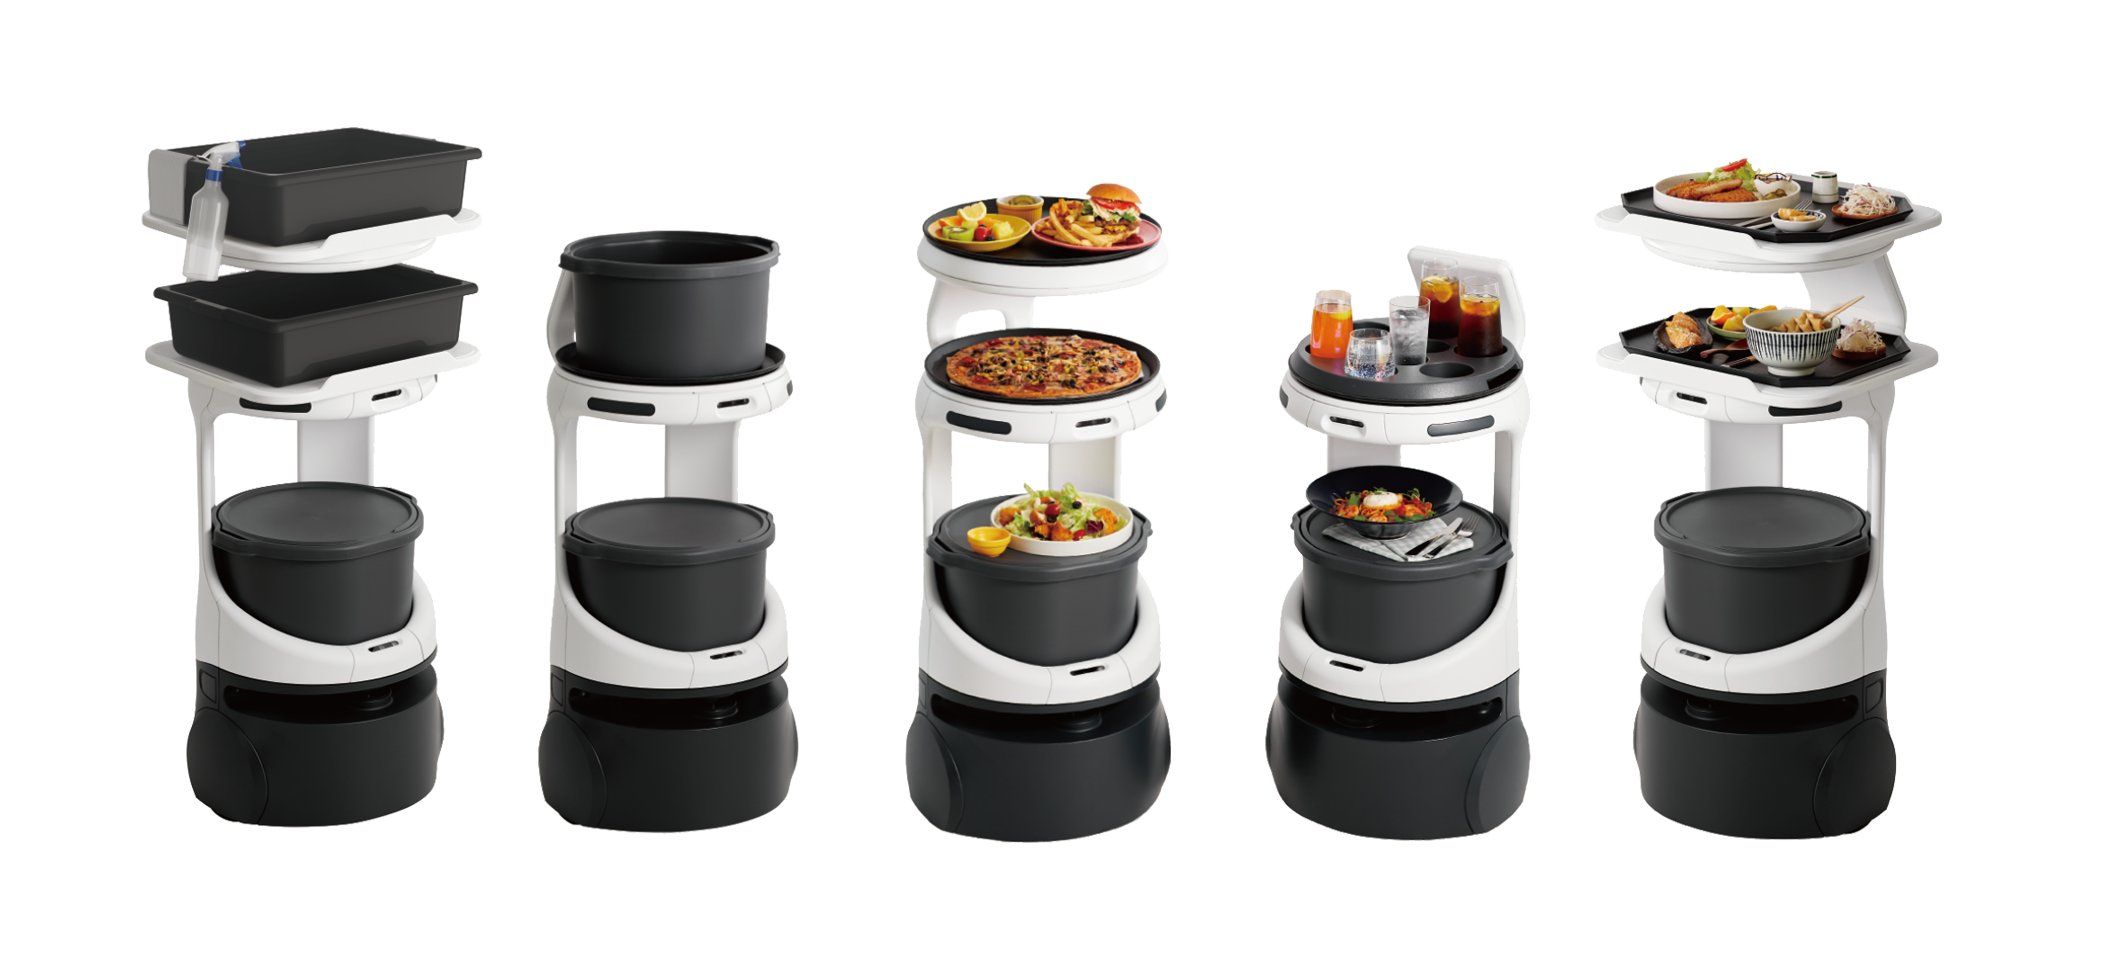 SERVI and SERVI MINI food service robot models from MetaDolce Technology